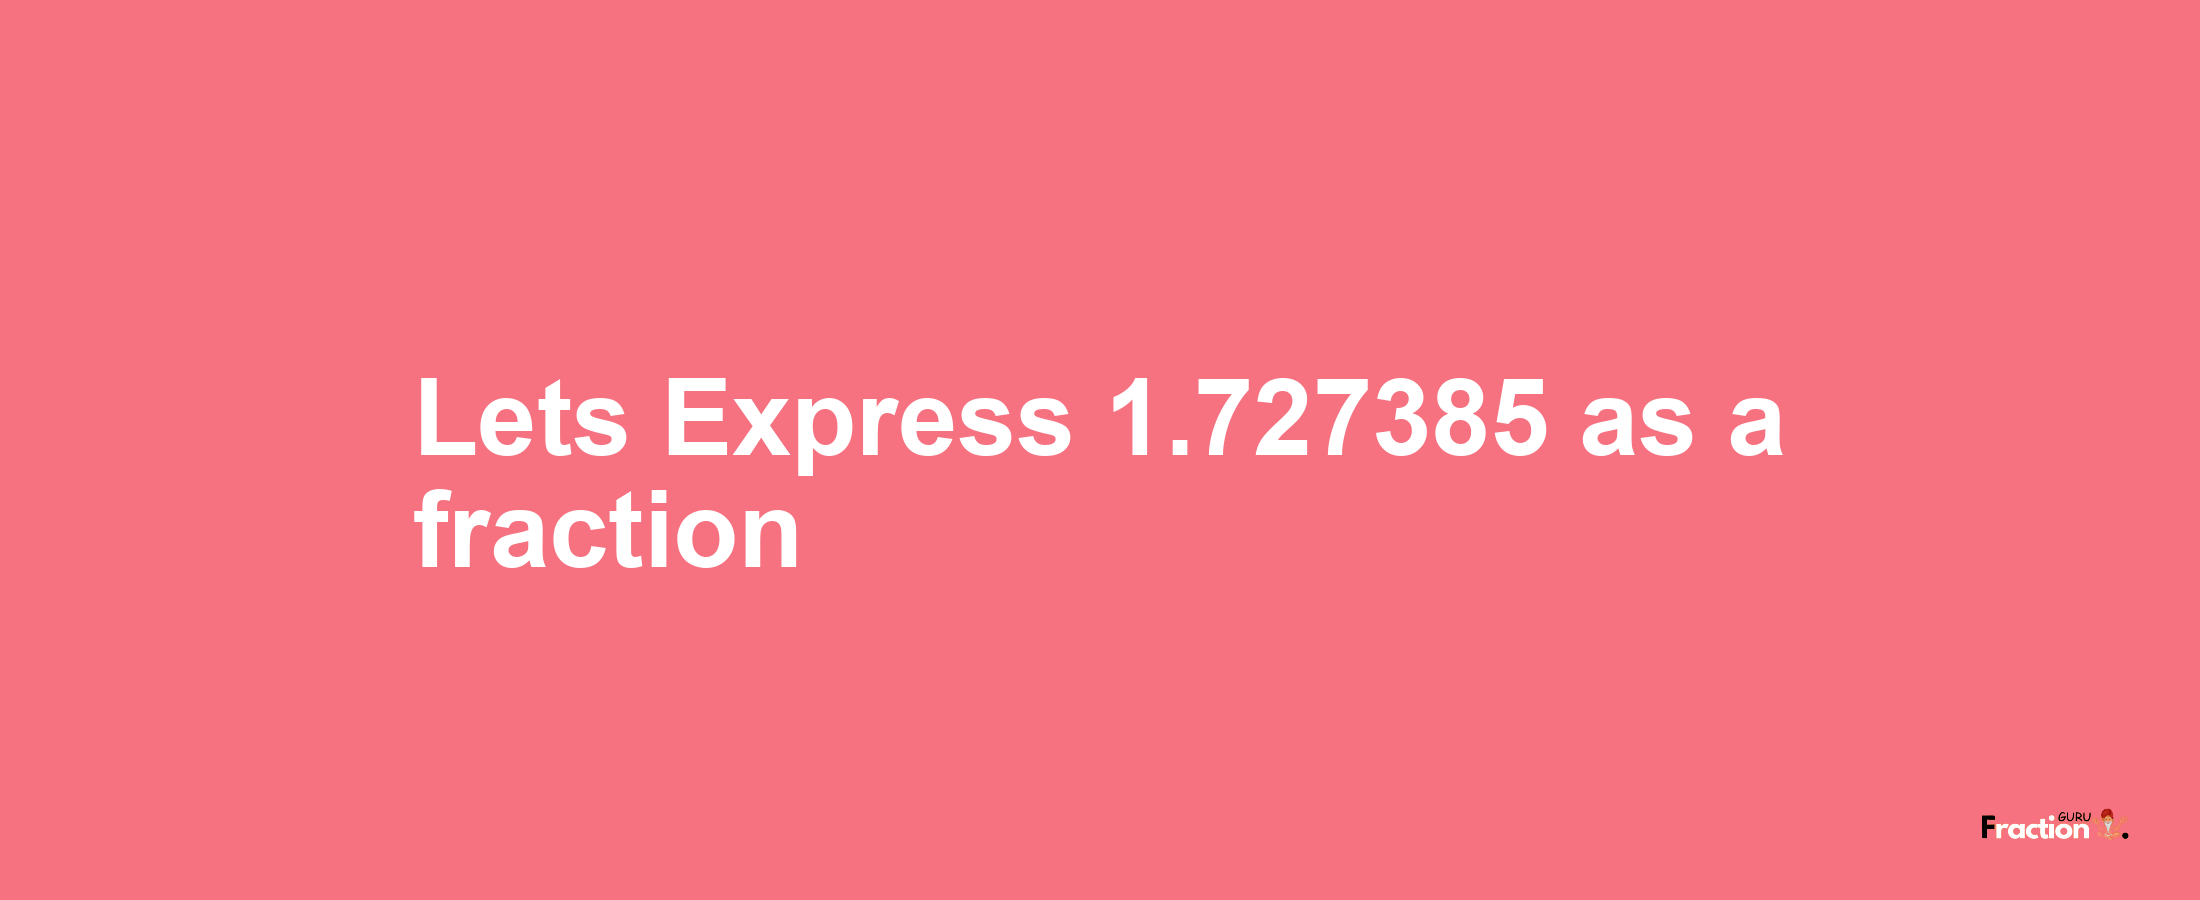 Lets Express 1.727385 as afraction